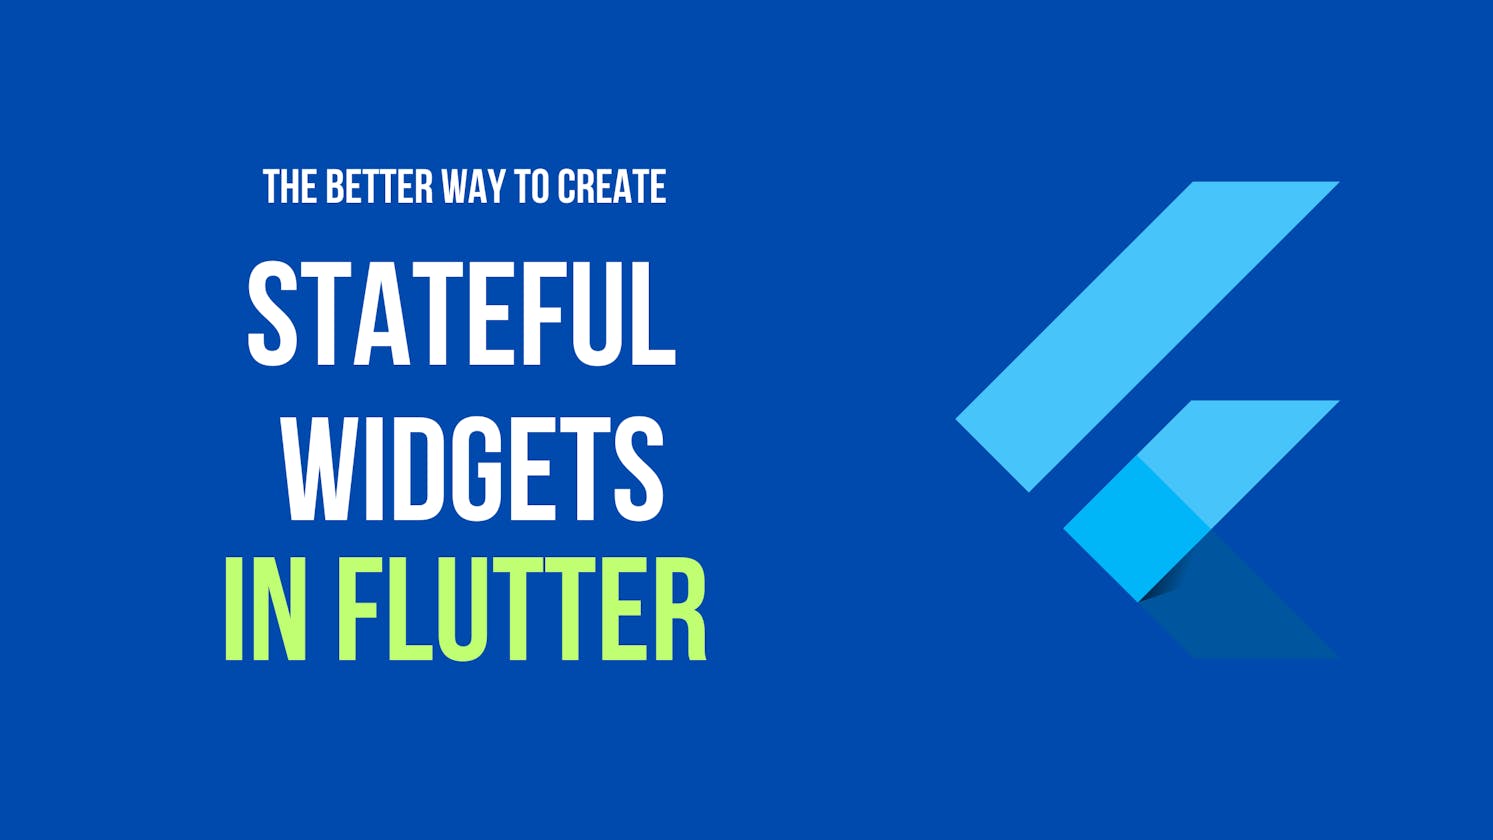 The better way to create  stateful widgets in flutter